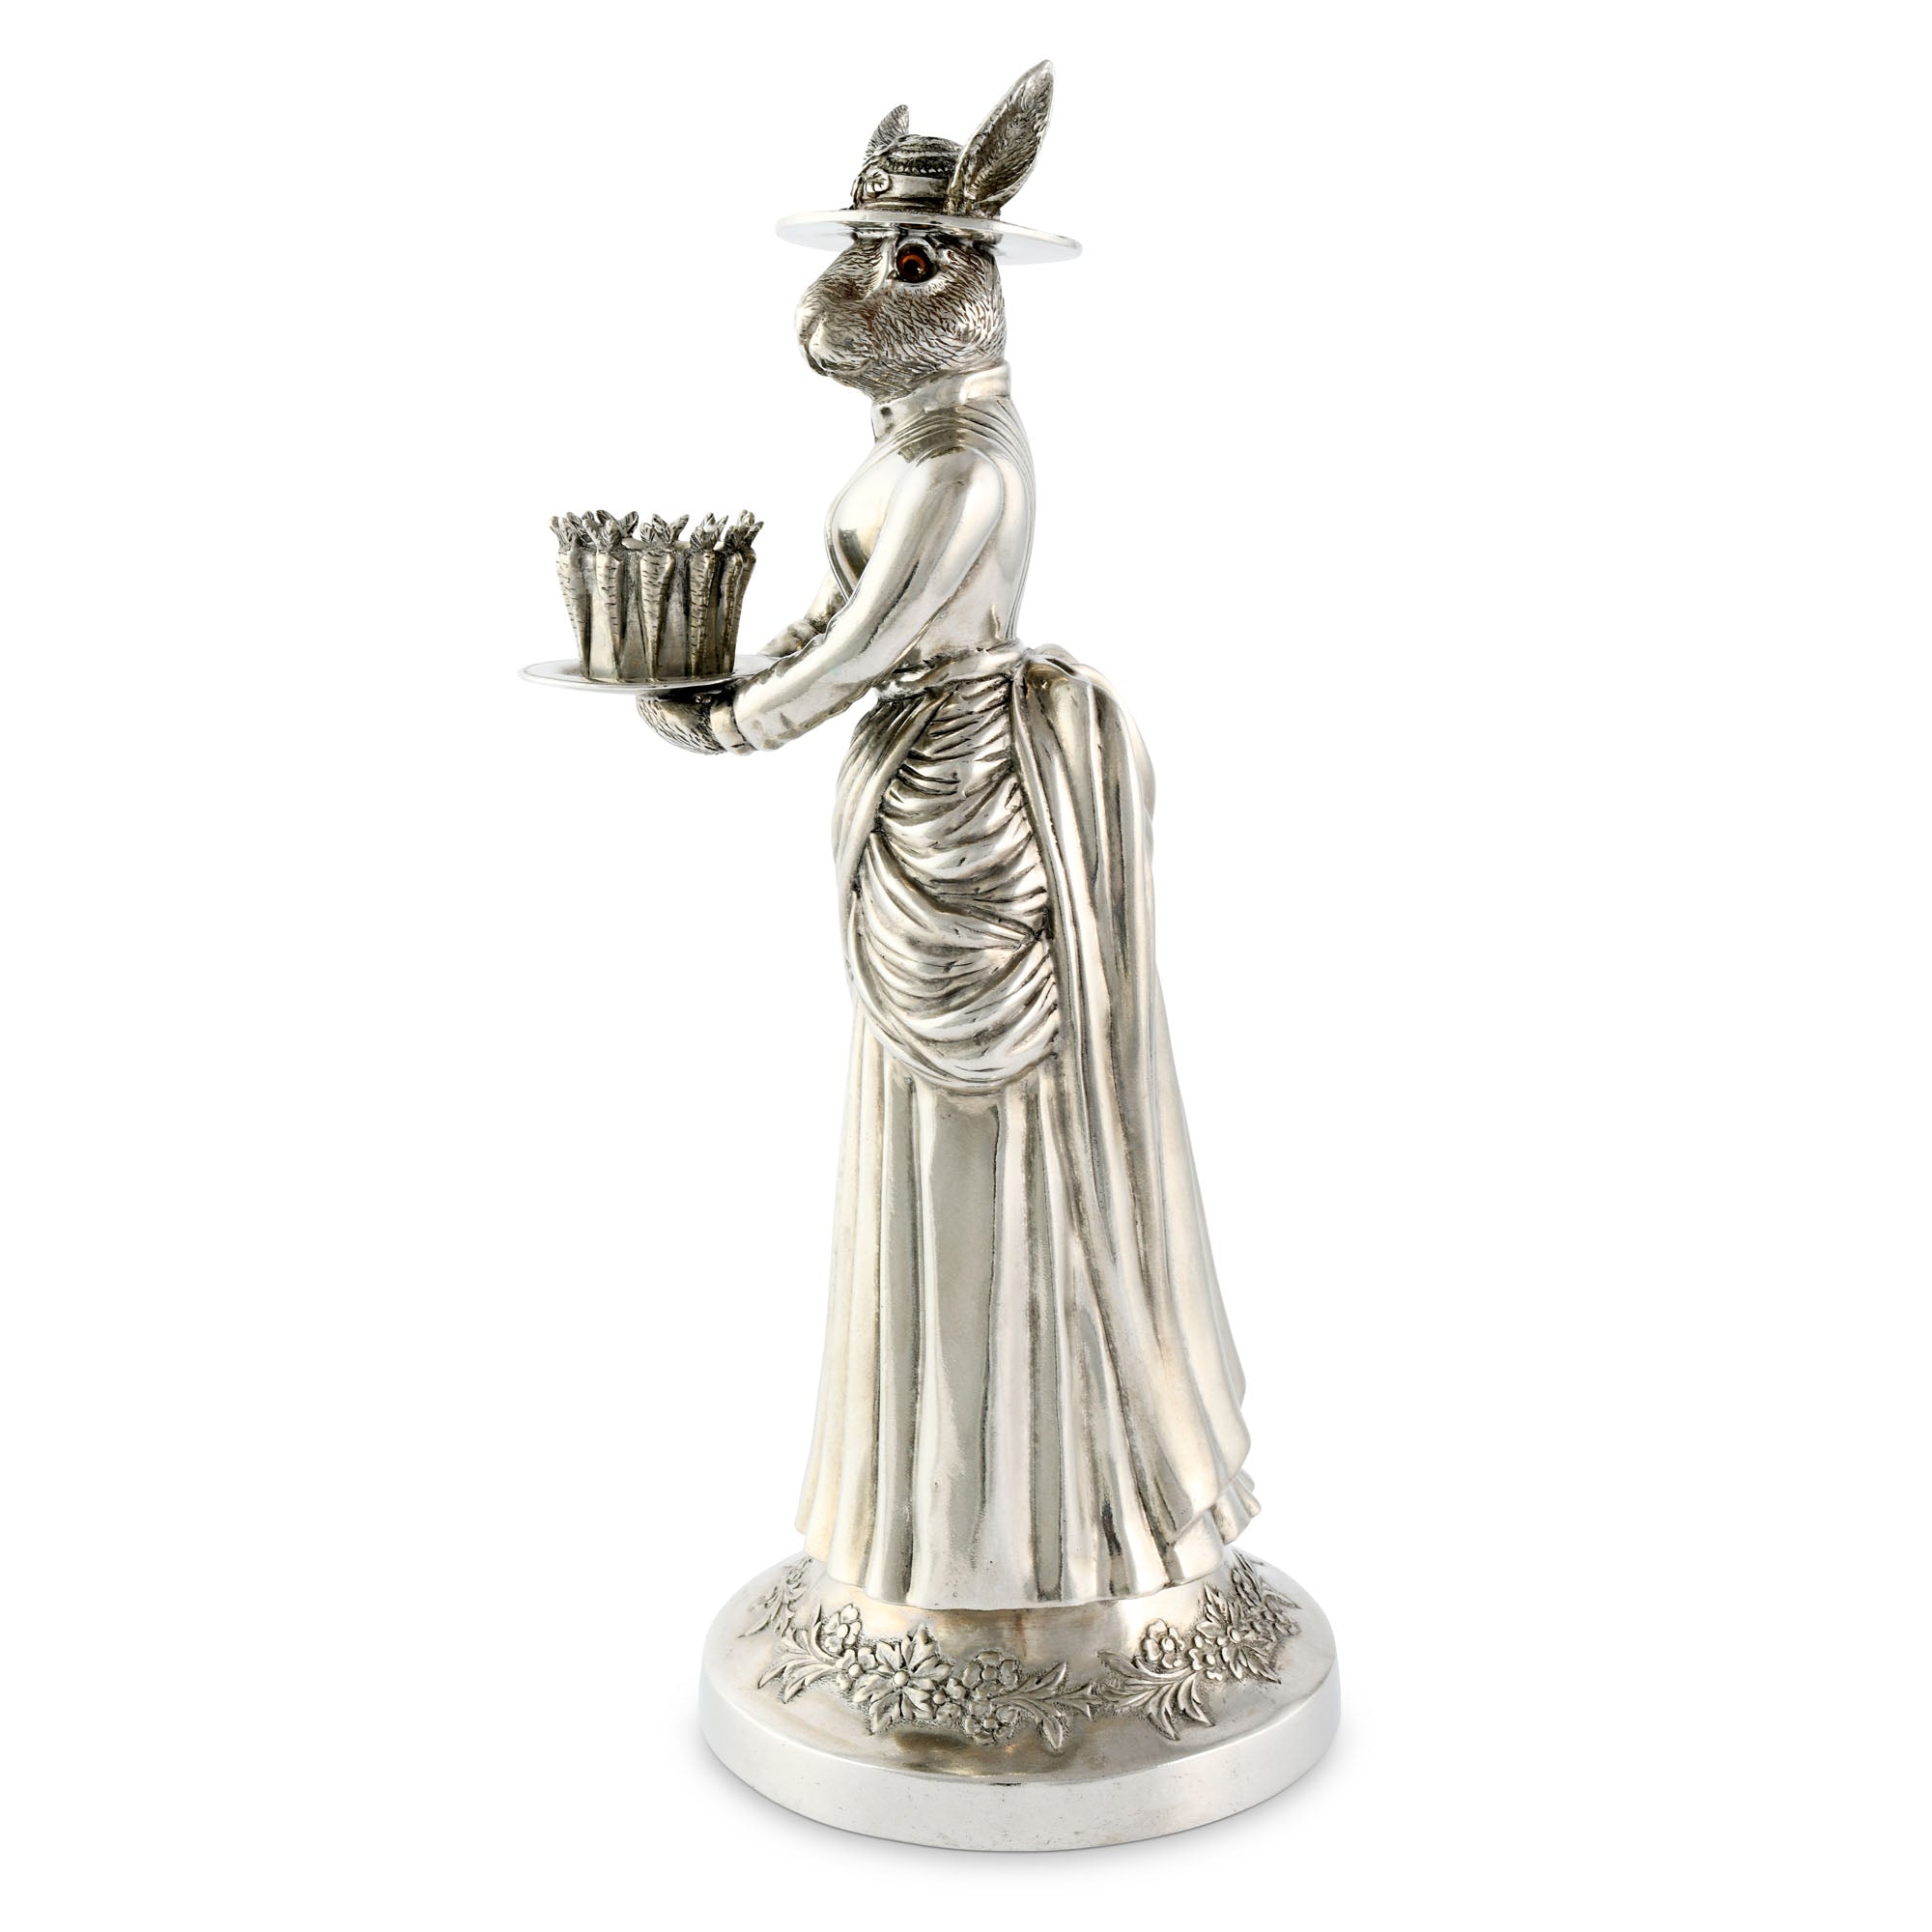 Vagabond House Lady Hare Tall Candlestick Product Image